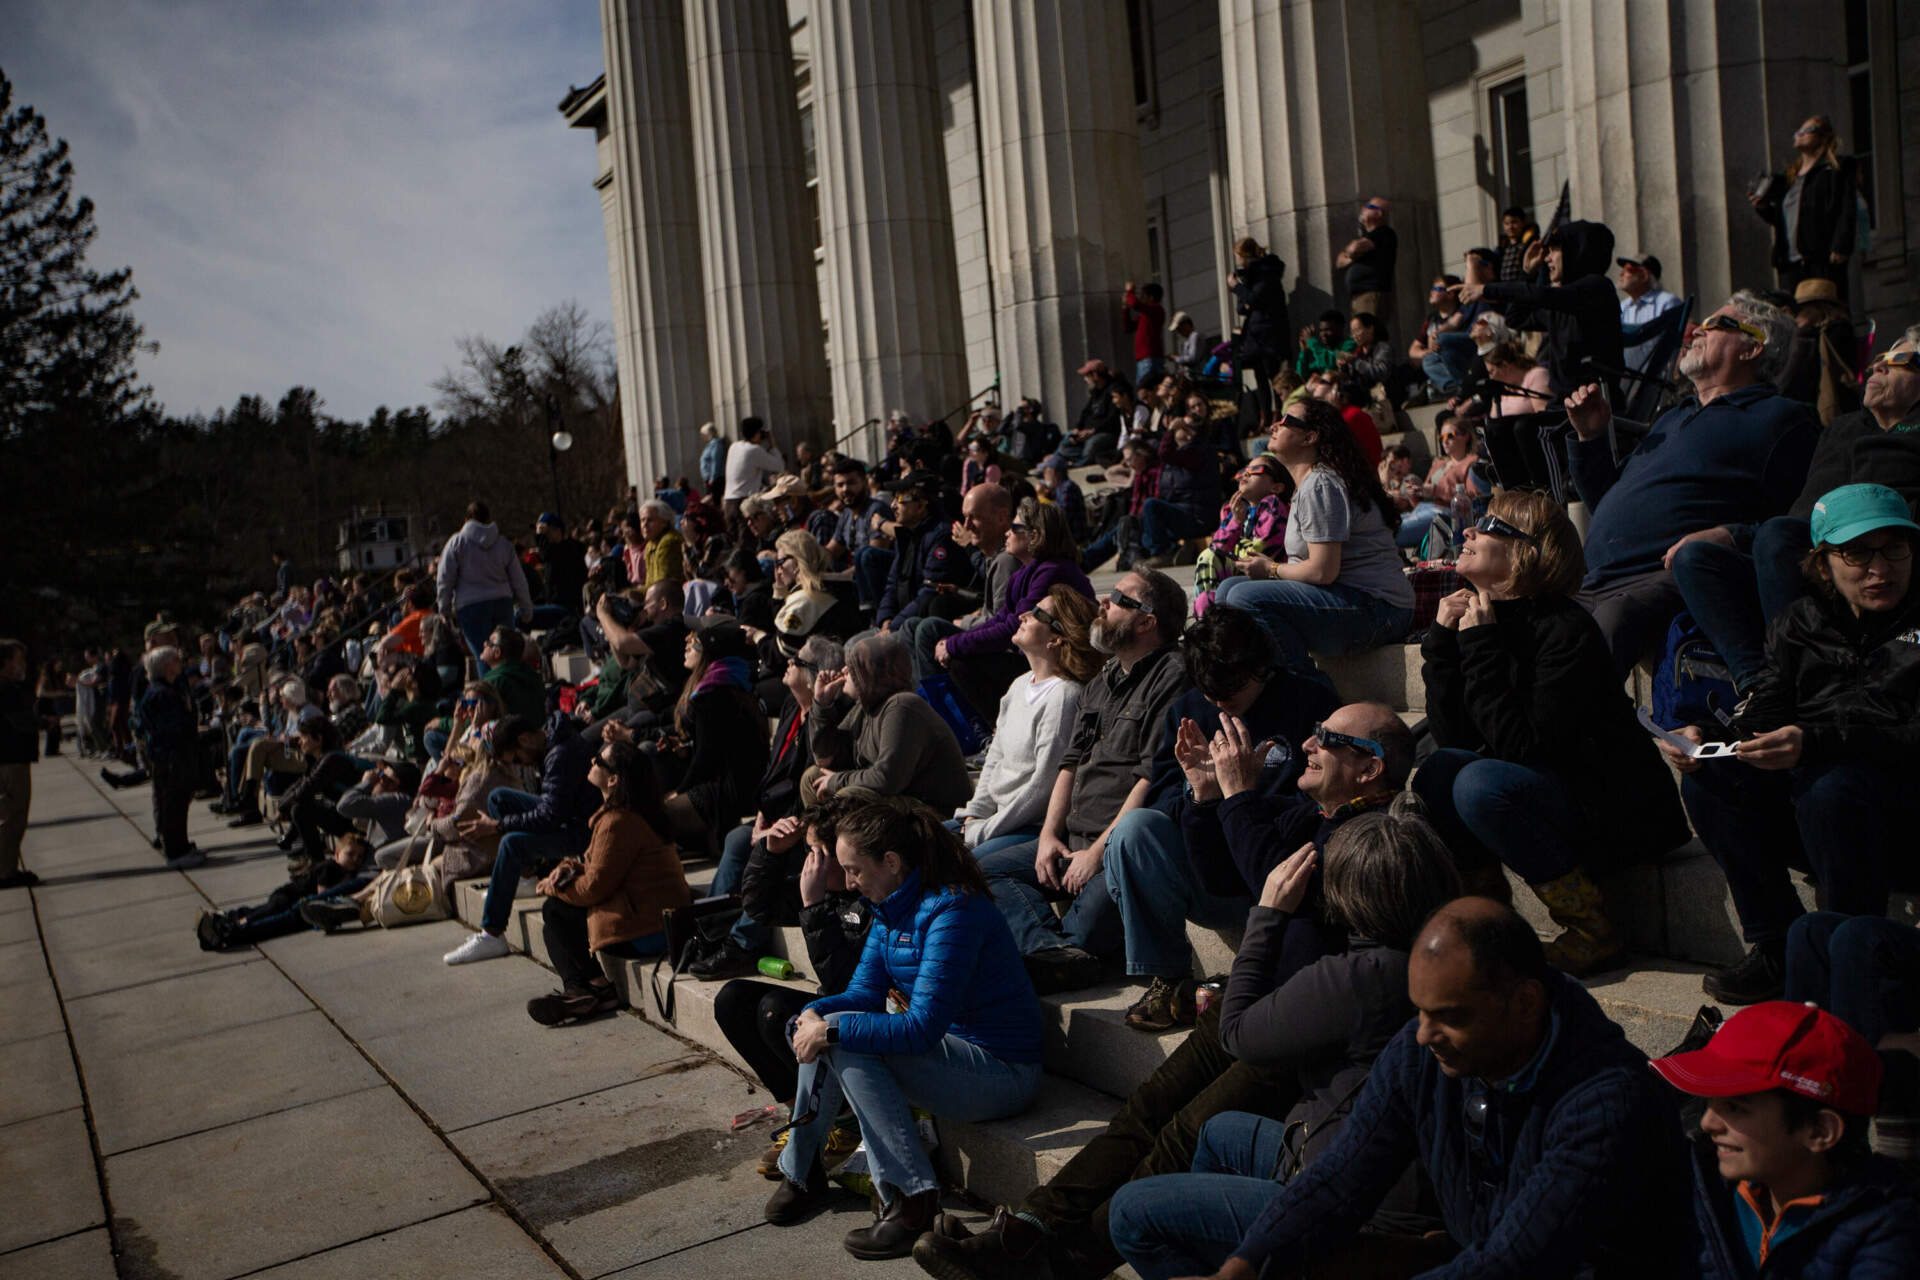 People sitting on the Vermont State House steps marvel as the moon covers the sun as the eclipse gets closer to totality as the sky darkens. (Jesse Costa/WBUR)